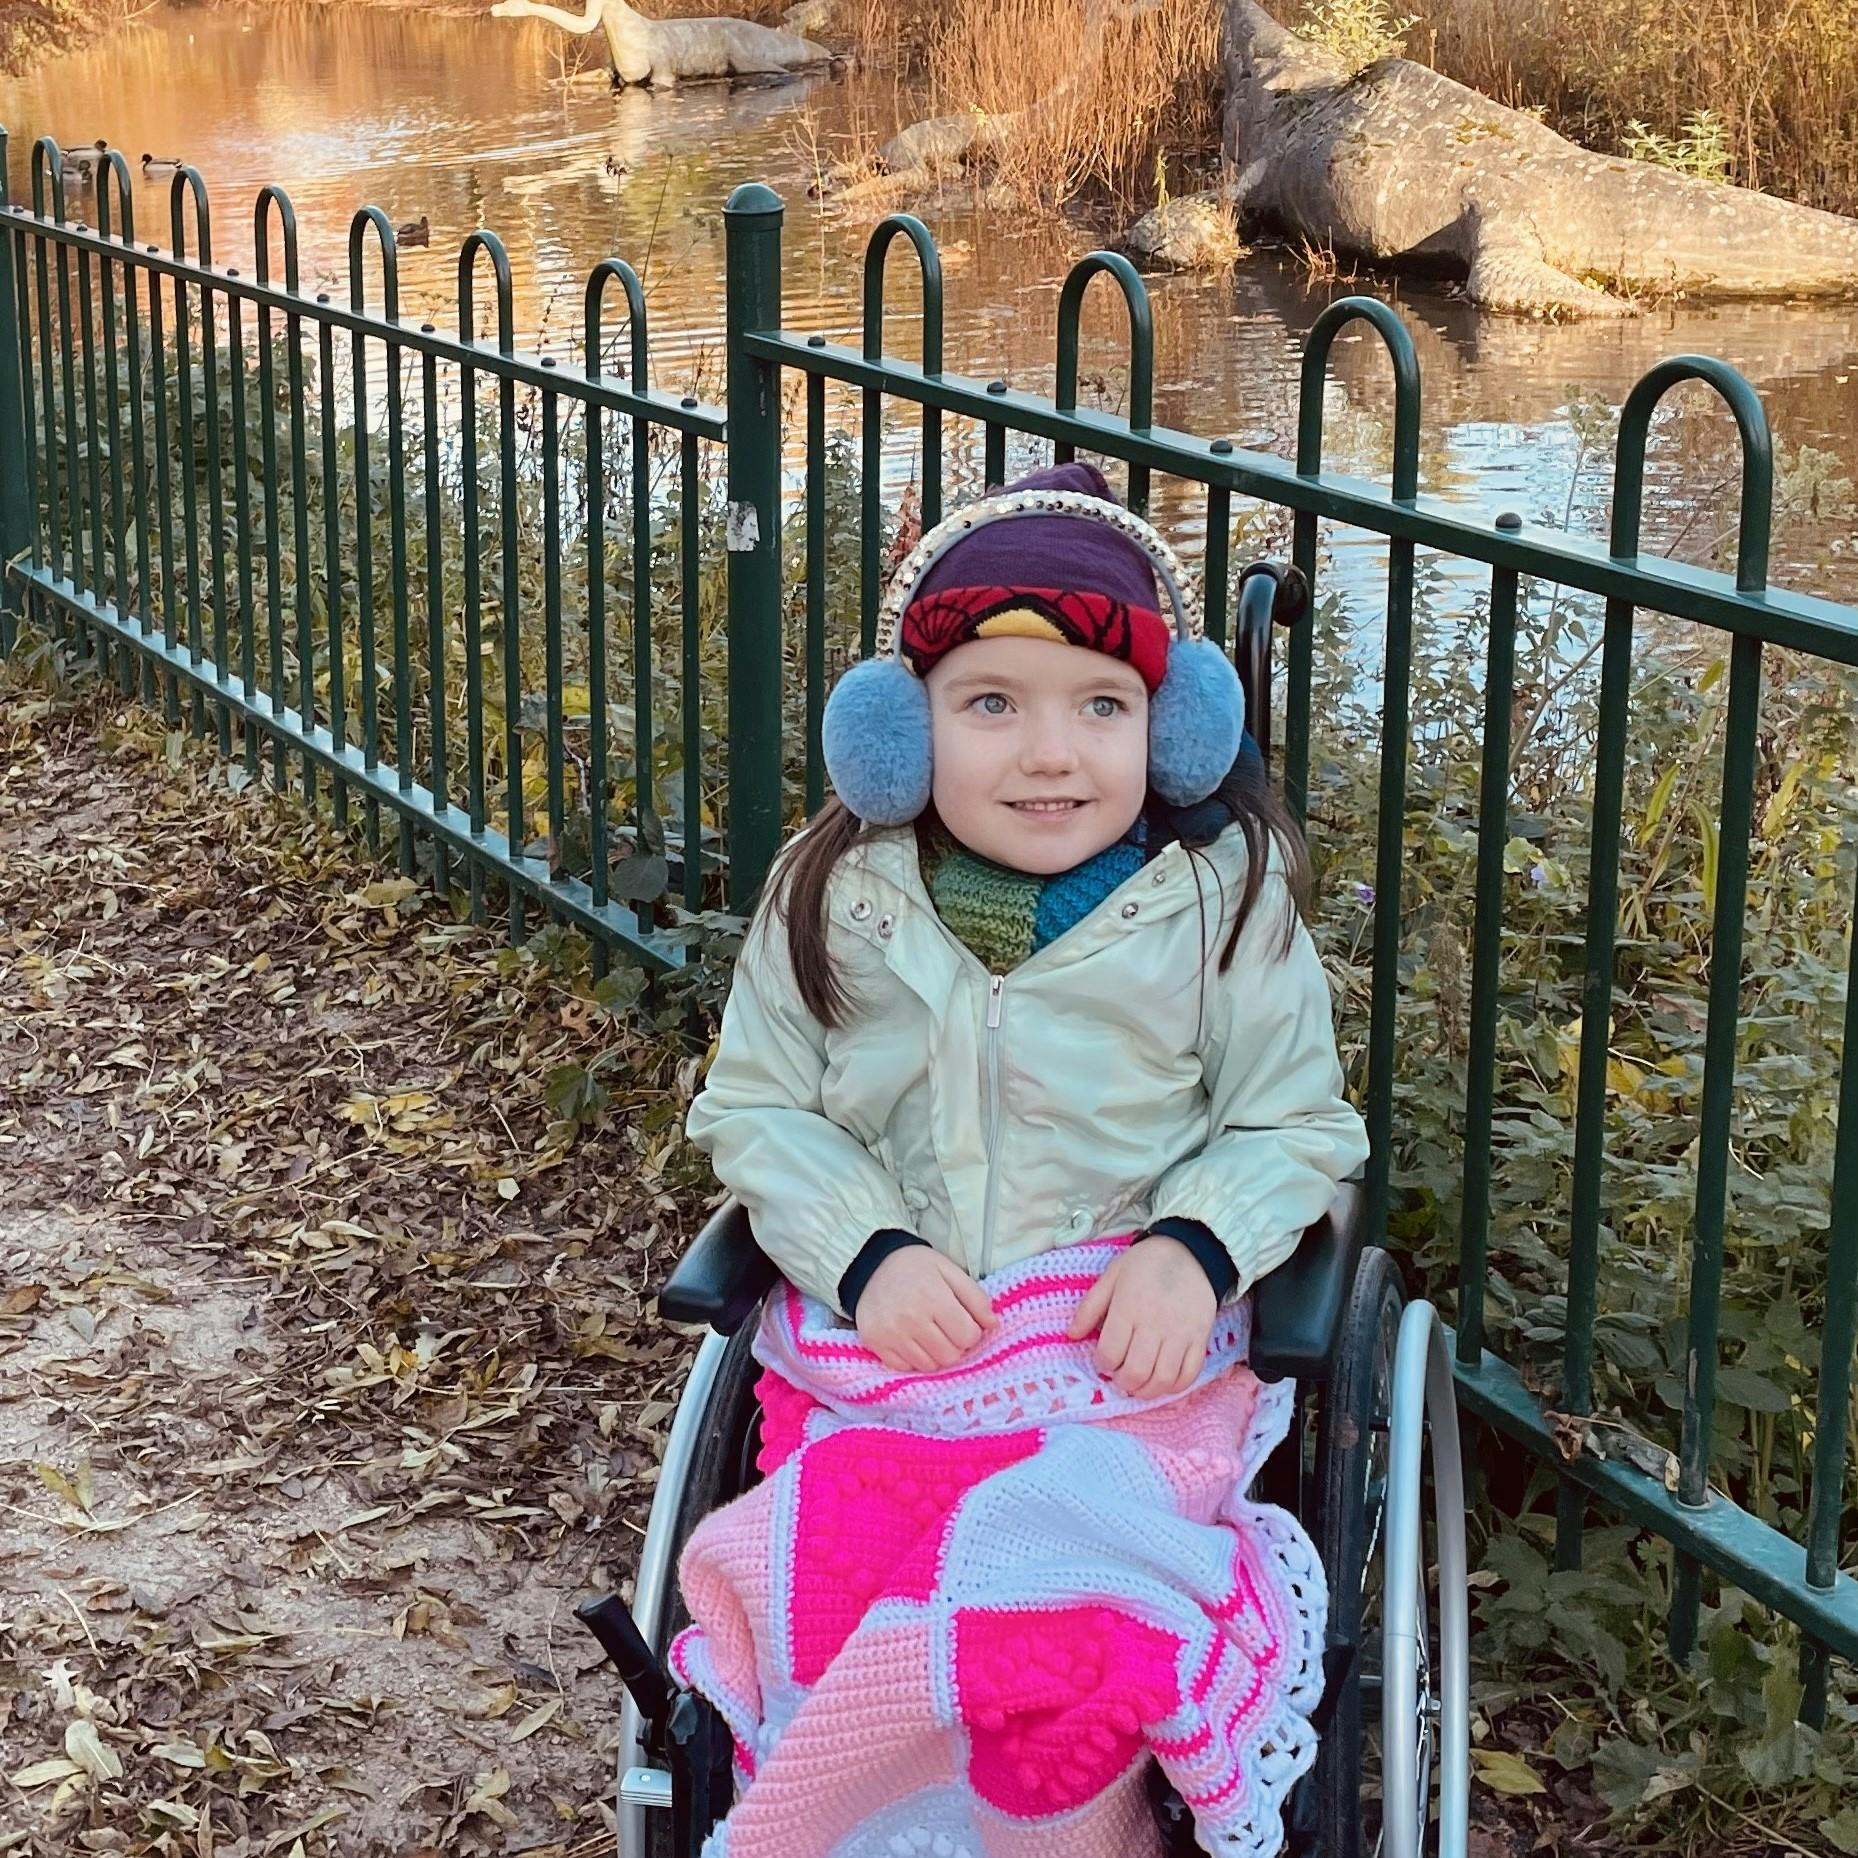 Ava sat in a wheelchair with a pink checked blanket over her lap, wearing blue ear muffs. She is in front of a metal railing with a pond in the back ground